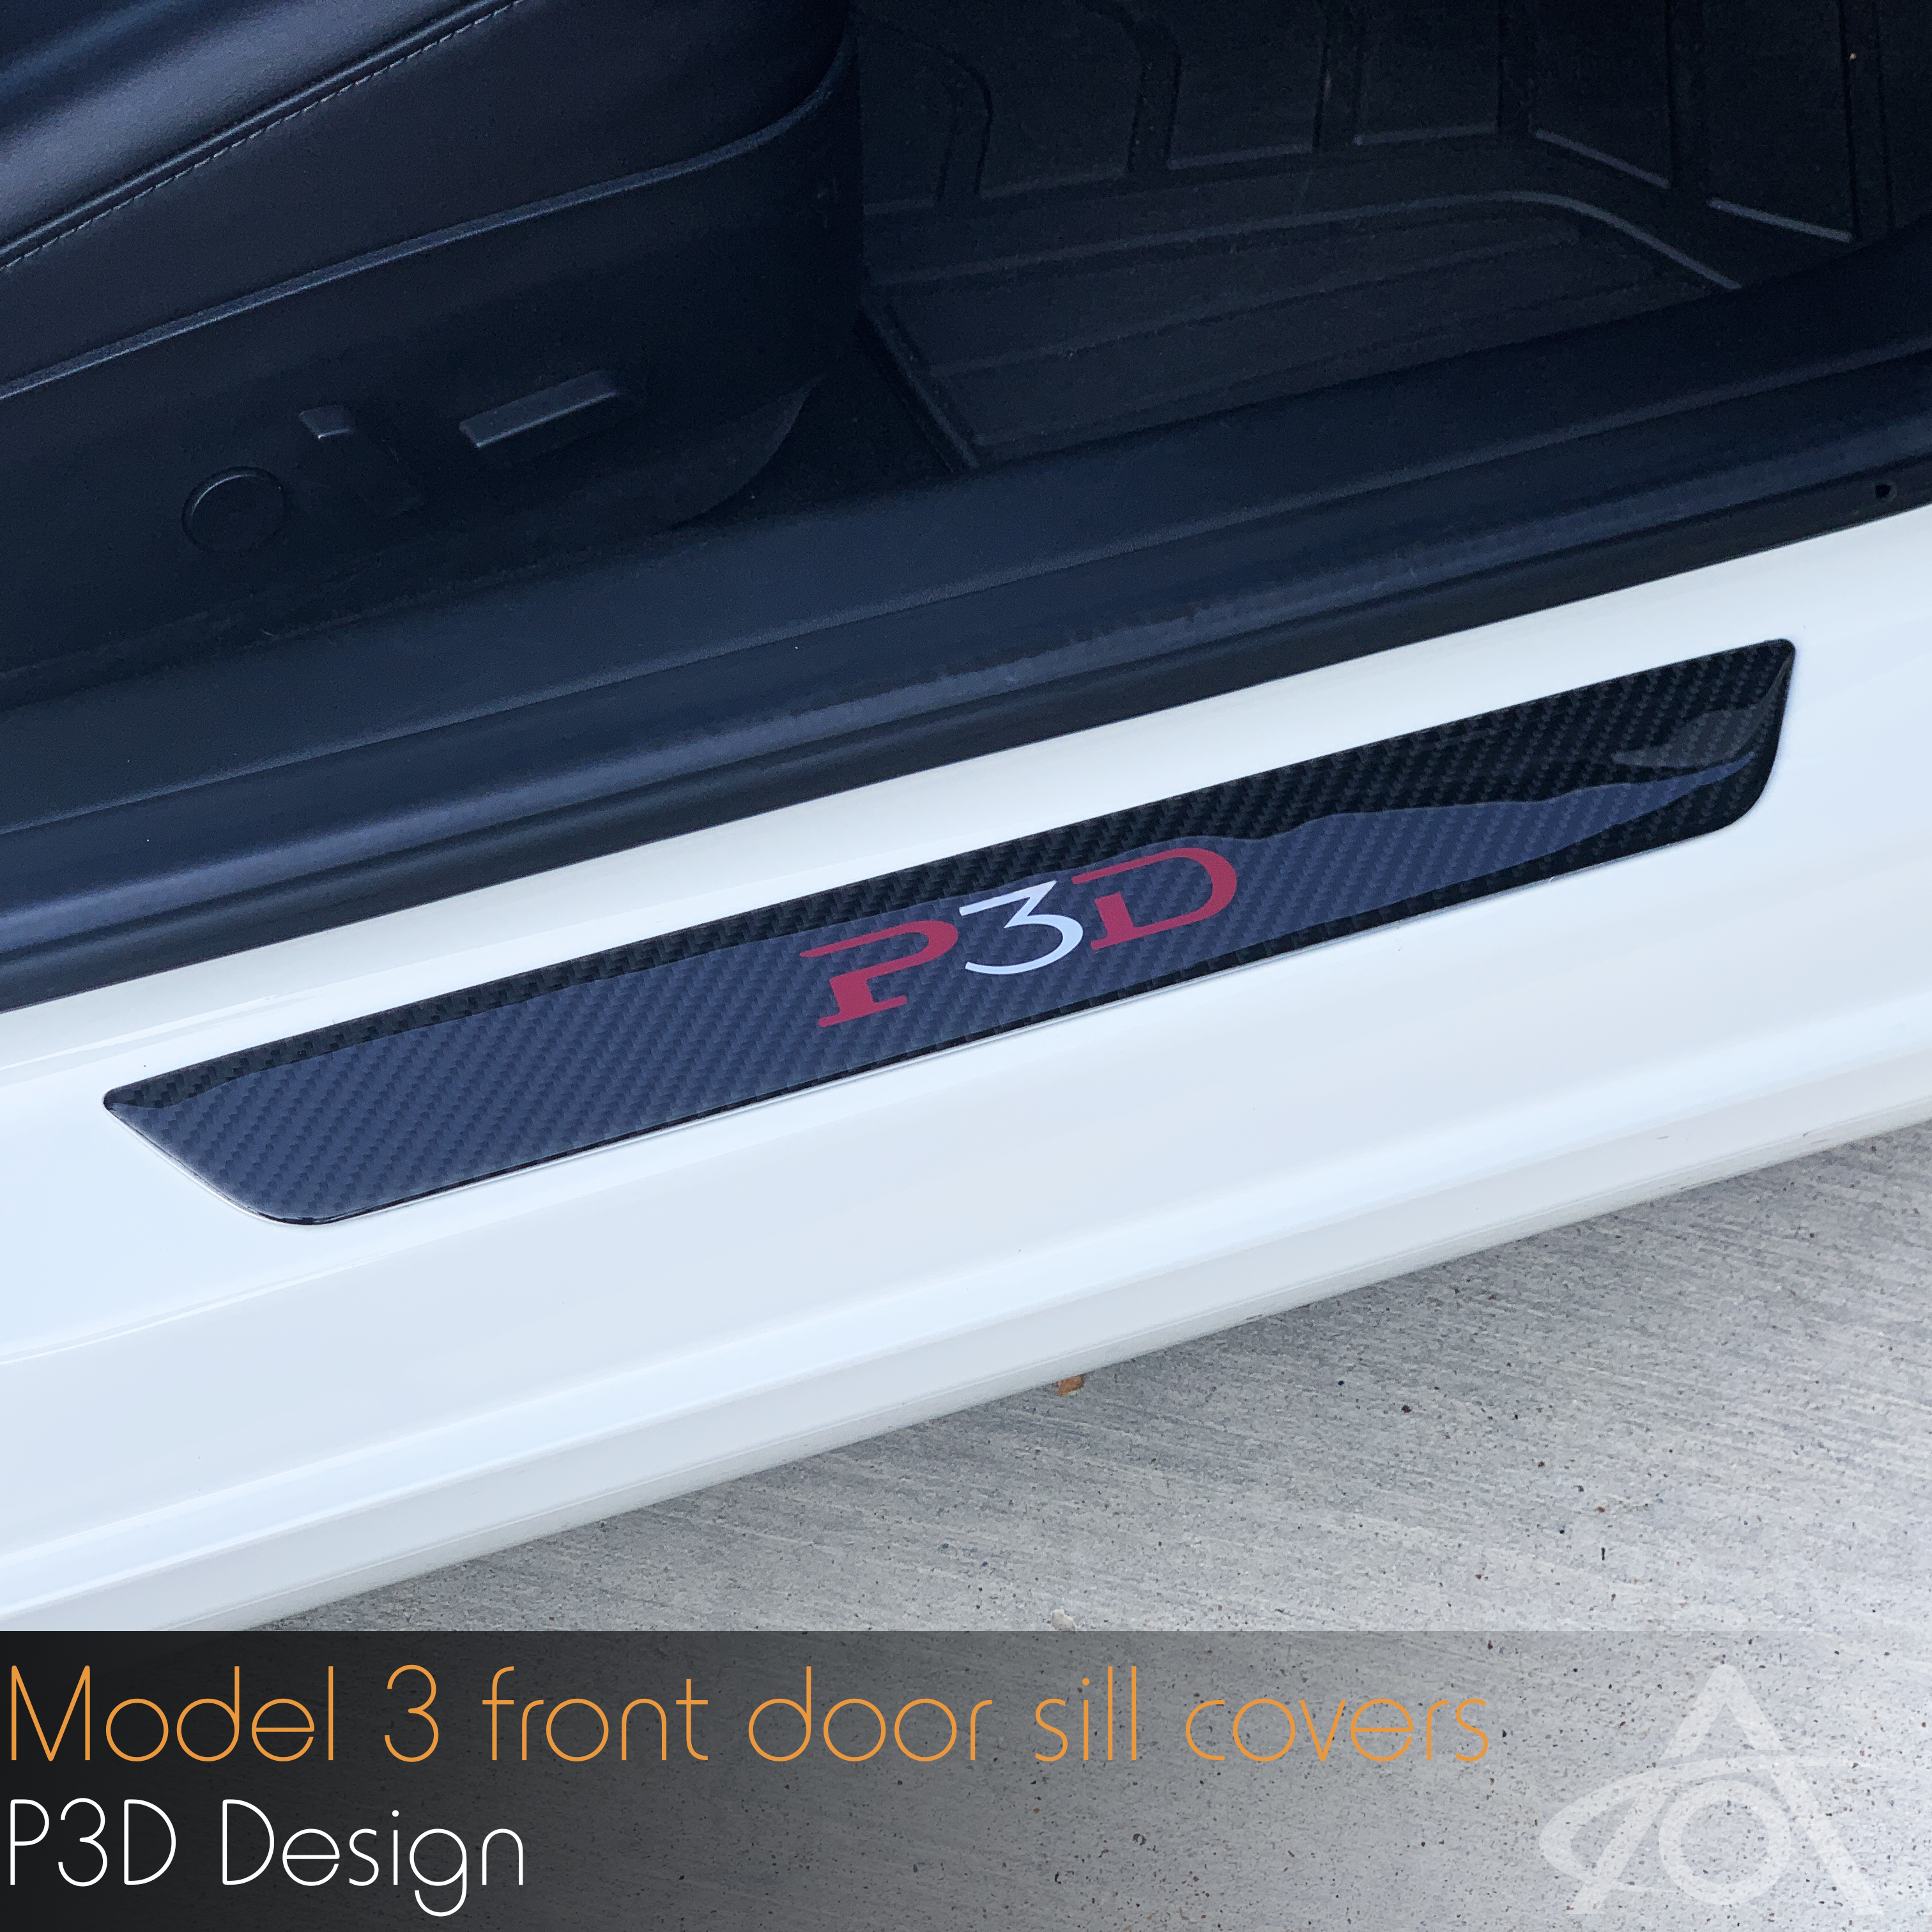 Door Sill Covers for the Tesla Model 3